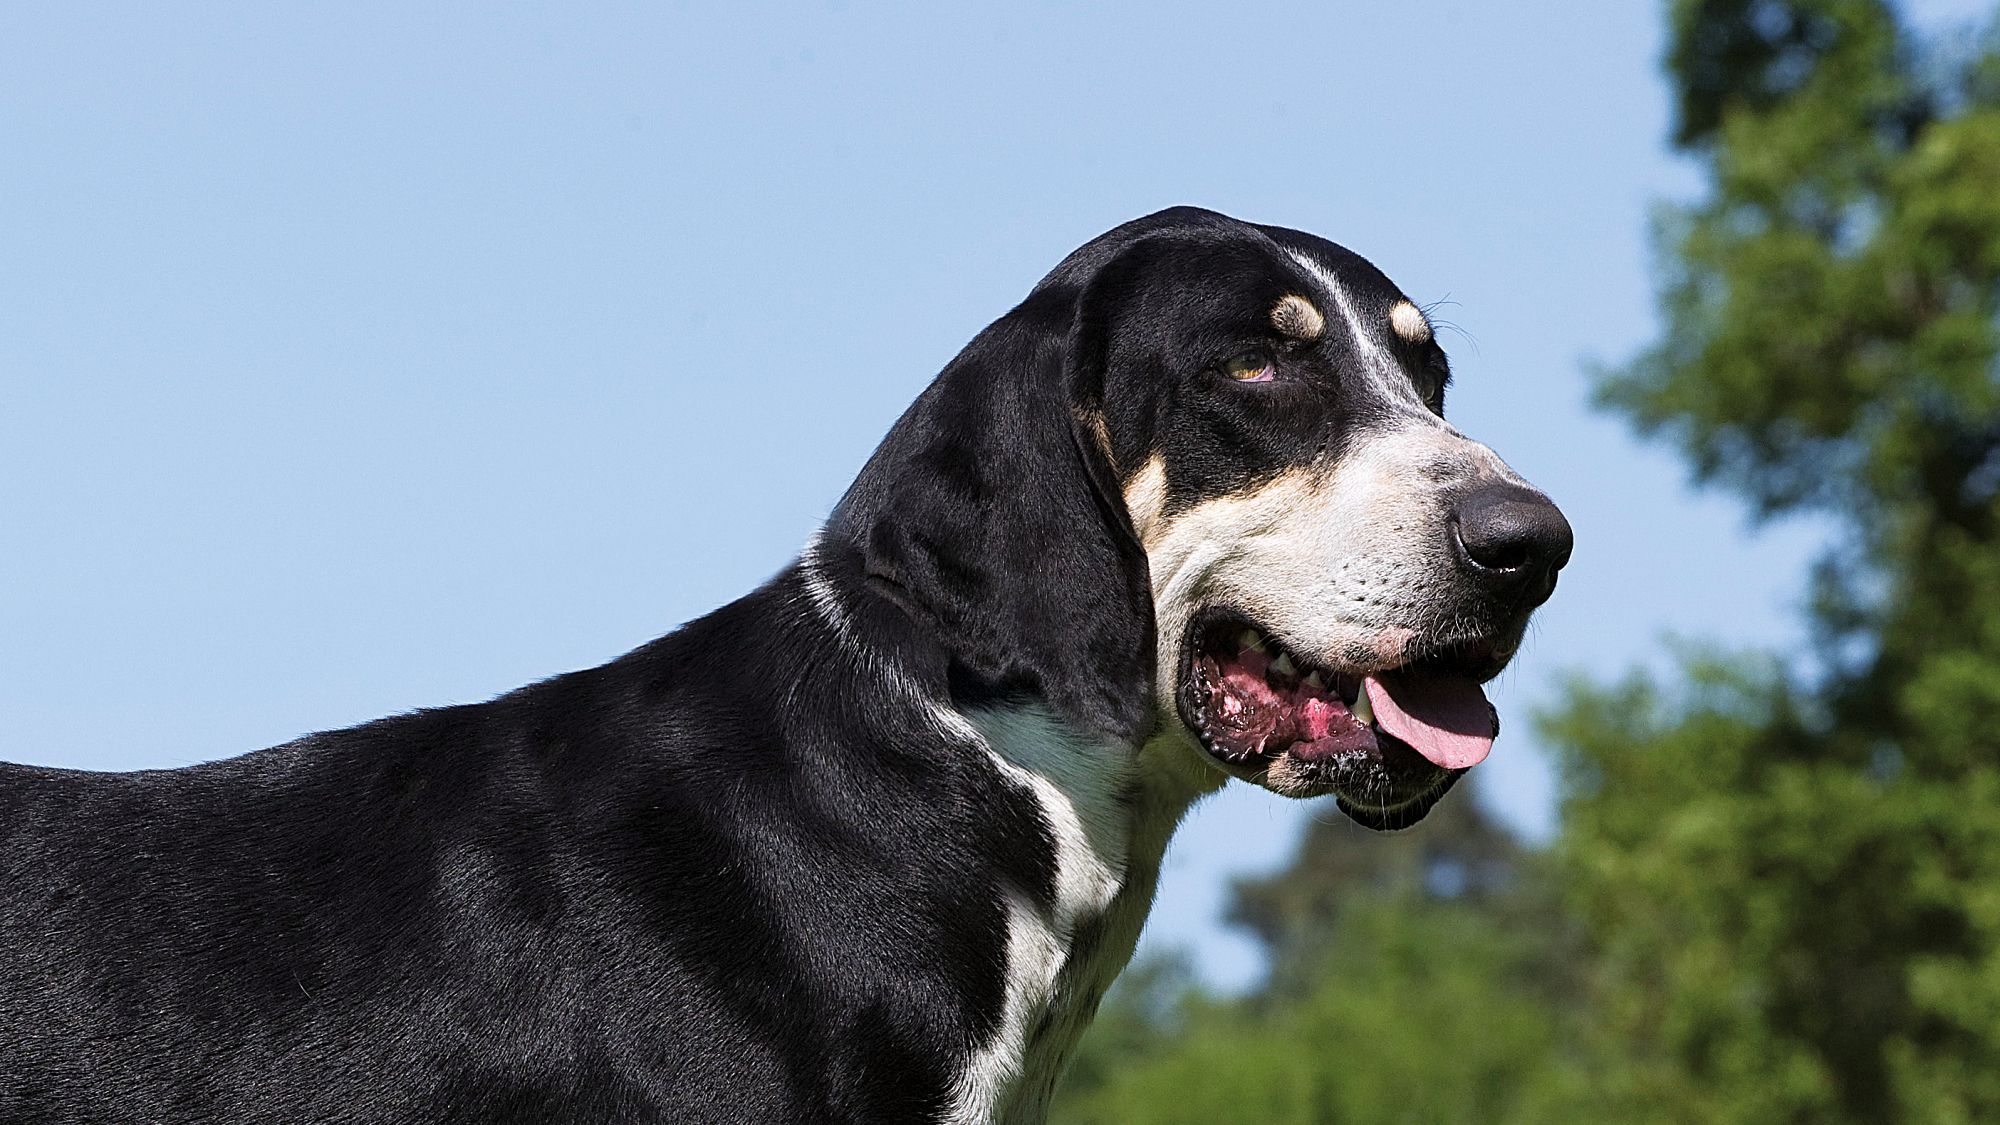 Great Anglo Francais Black and White Hound stood looking to the side, tongue out